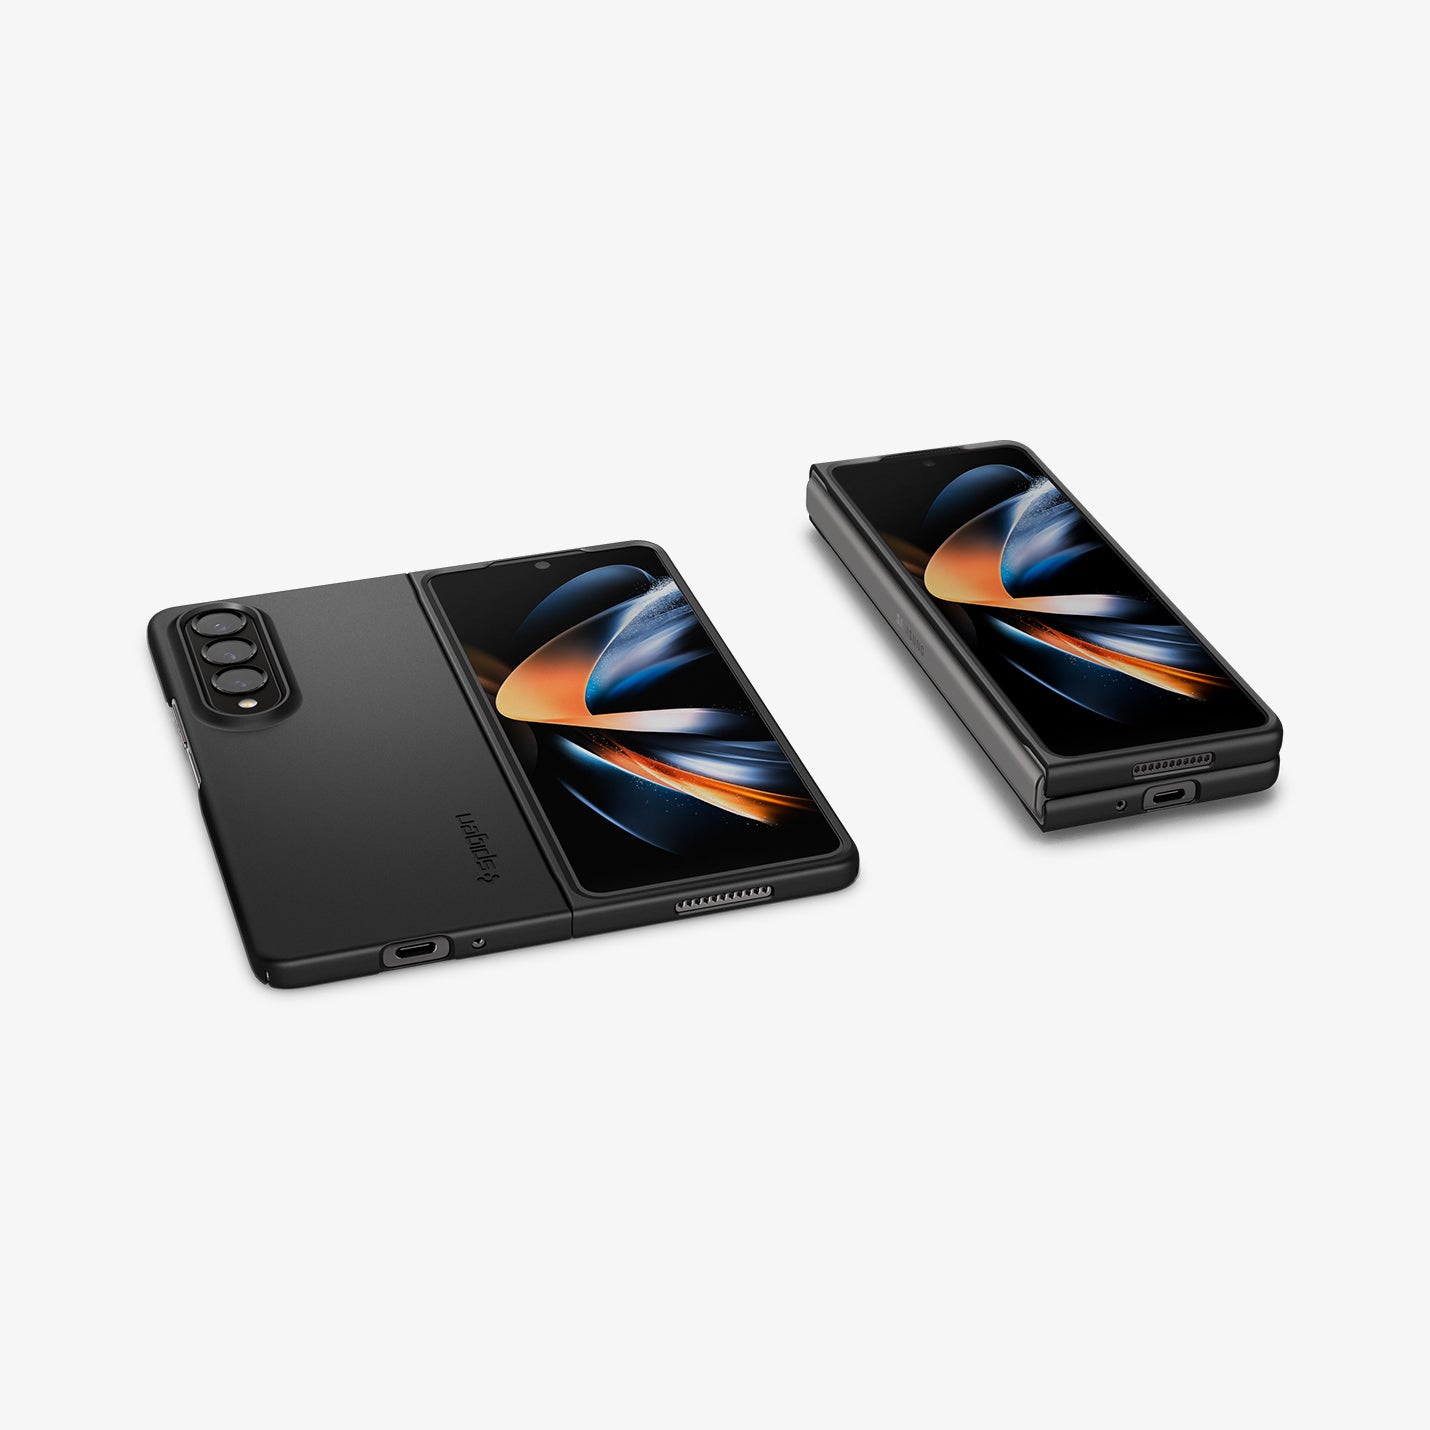 ACS05103 - Galaxy Z Fold 4 Case AirSkin in black showing the back and front of one device and the front folded on another device